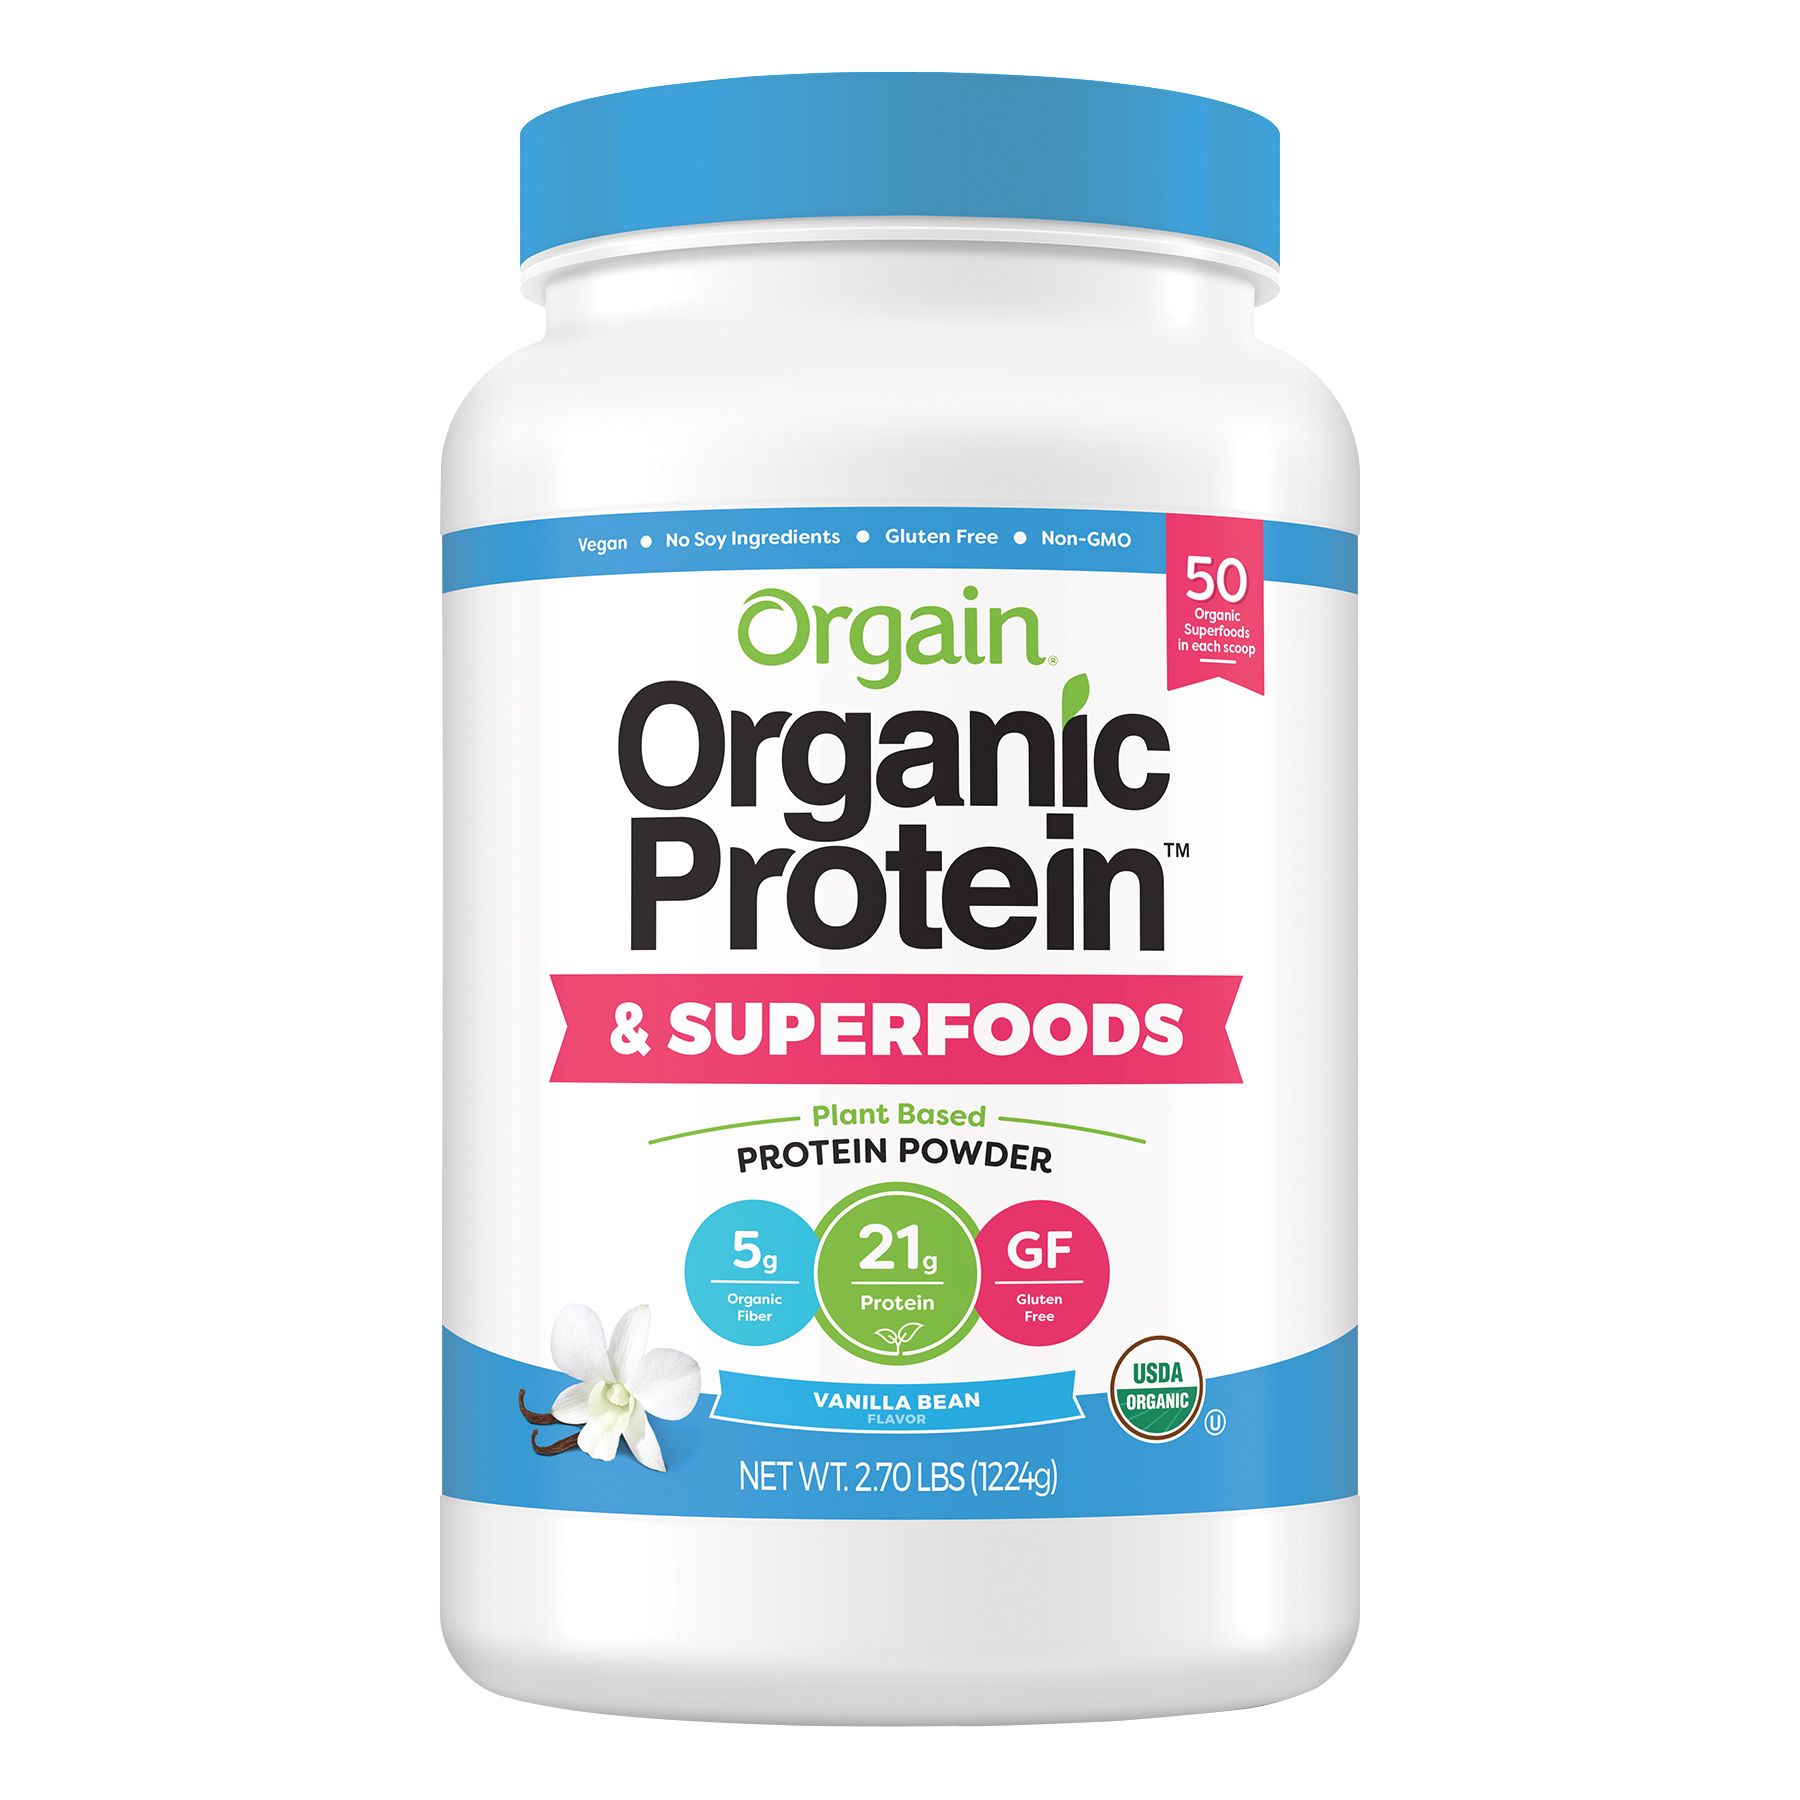 Orgain Organic Protein and Superfoods, 2.7 lbs.